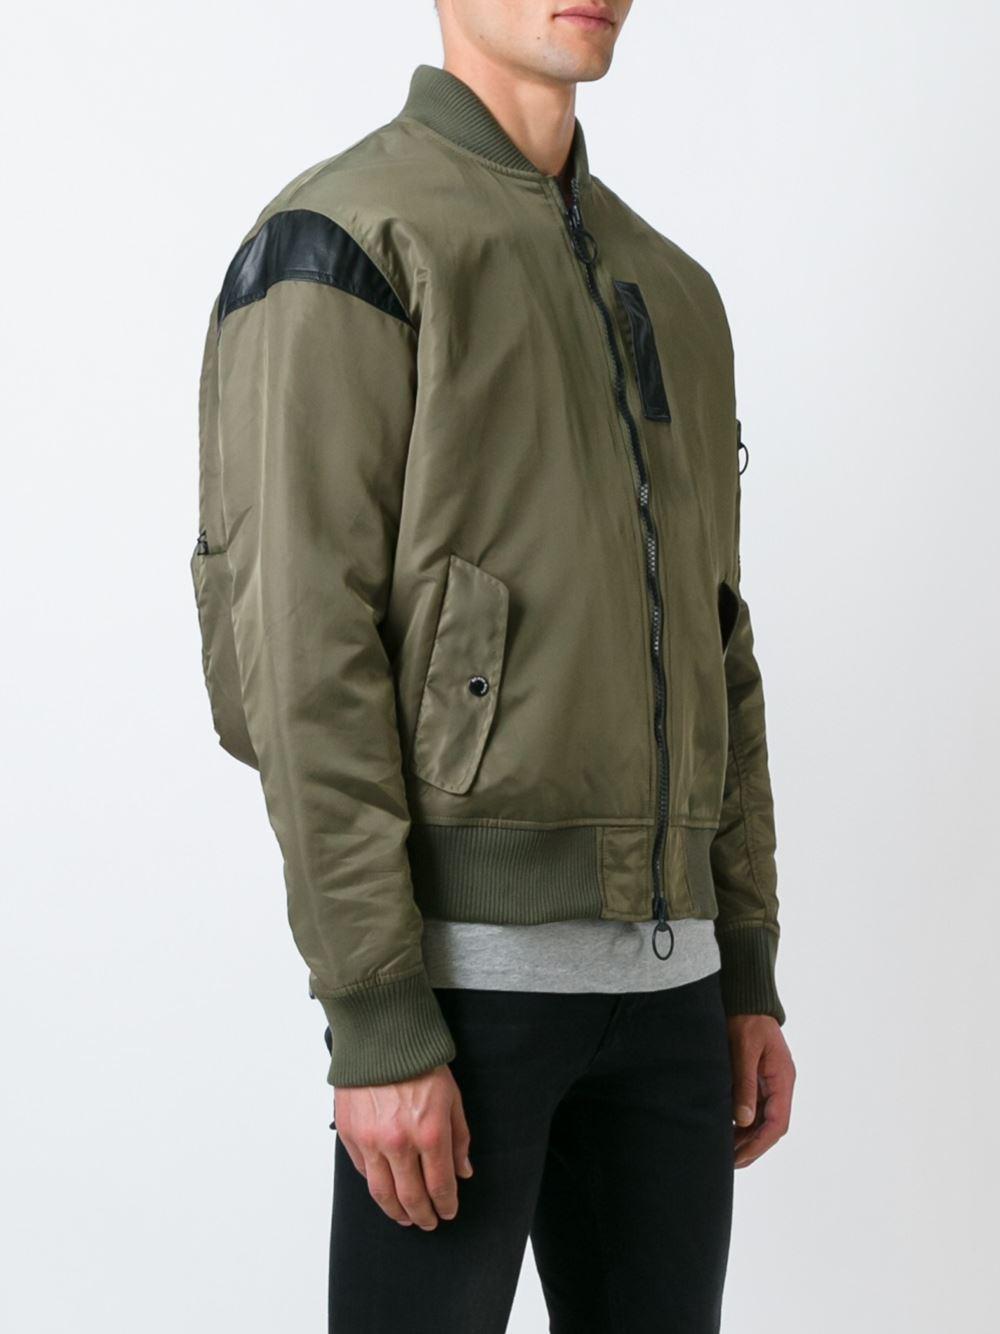 Mostly Heard Rarely Seen Classic Bomber Jacket in Green for Men - Lyst